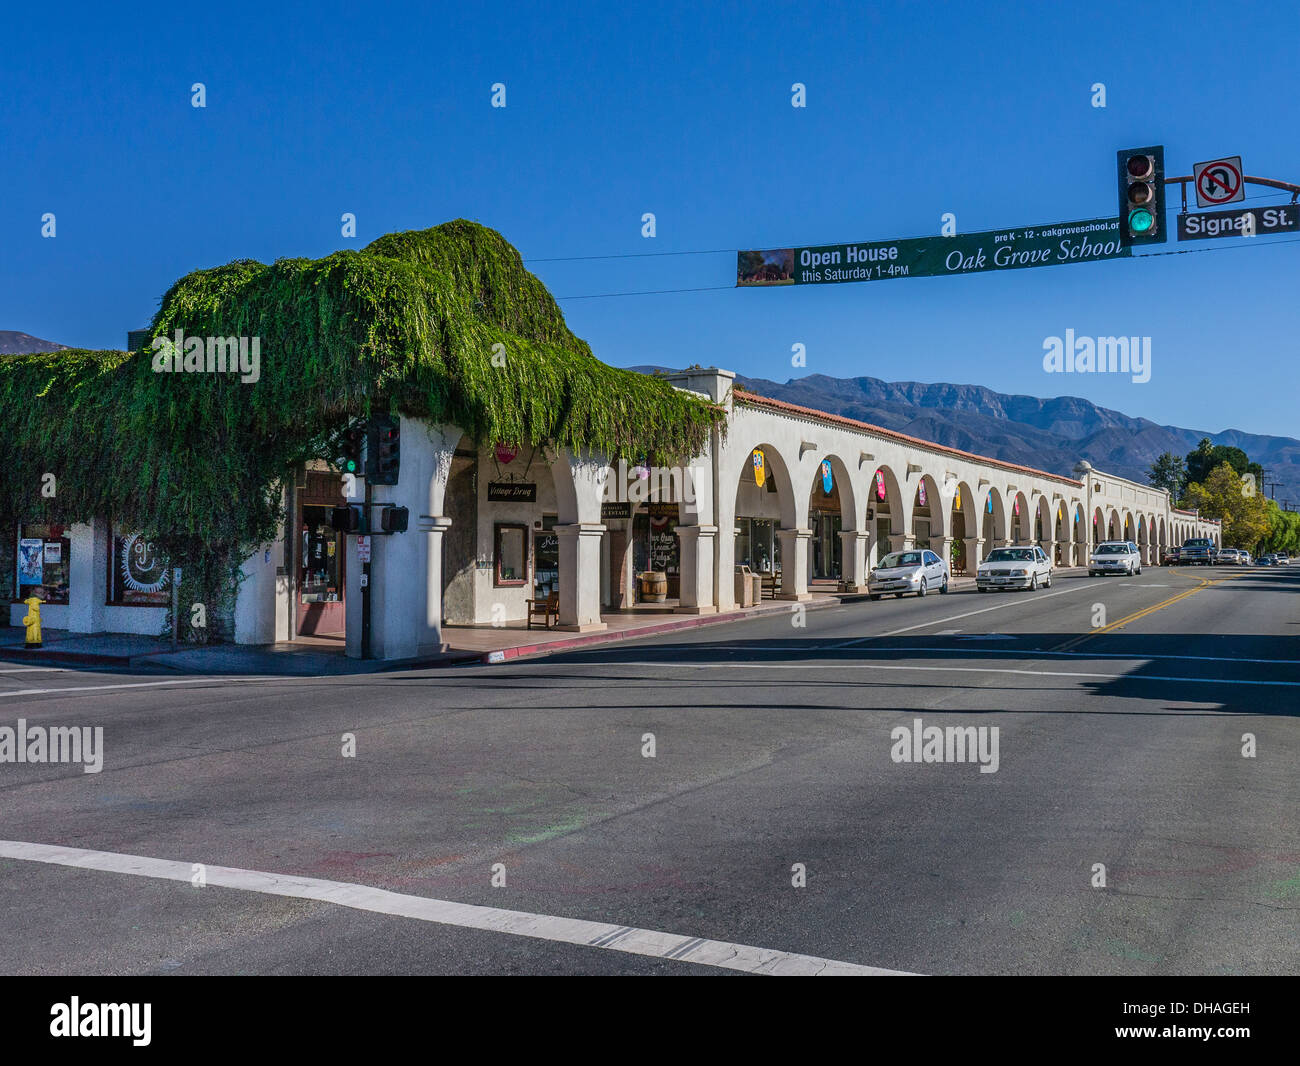 A view from the street of the historic arcade in Ojai, California with the distant mountains in the background. Stock Photo